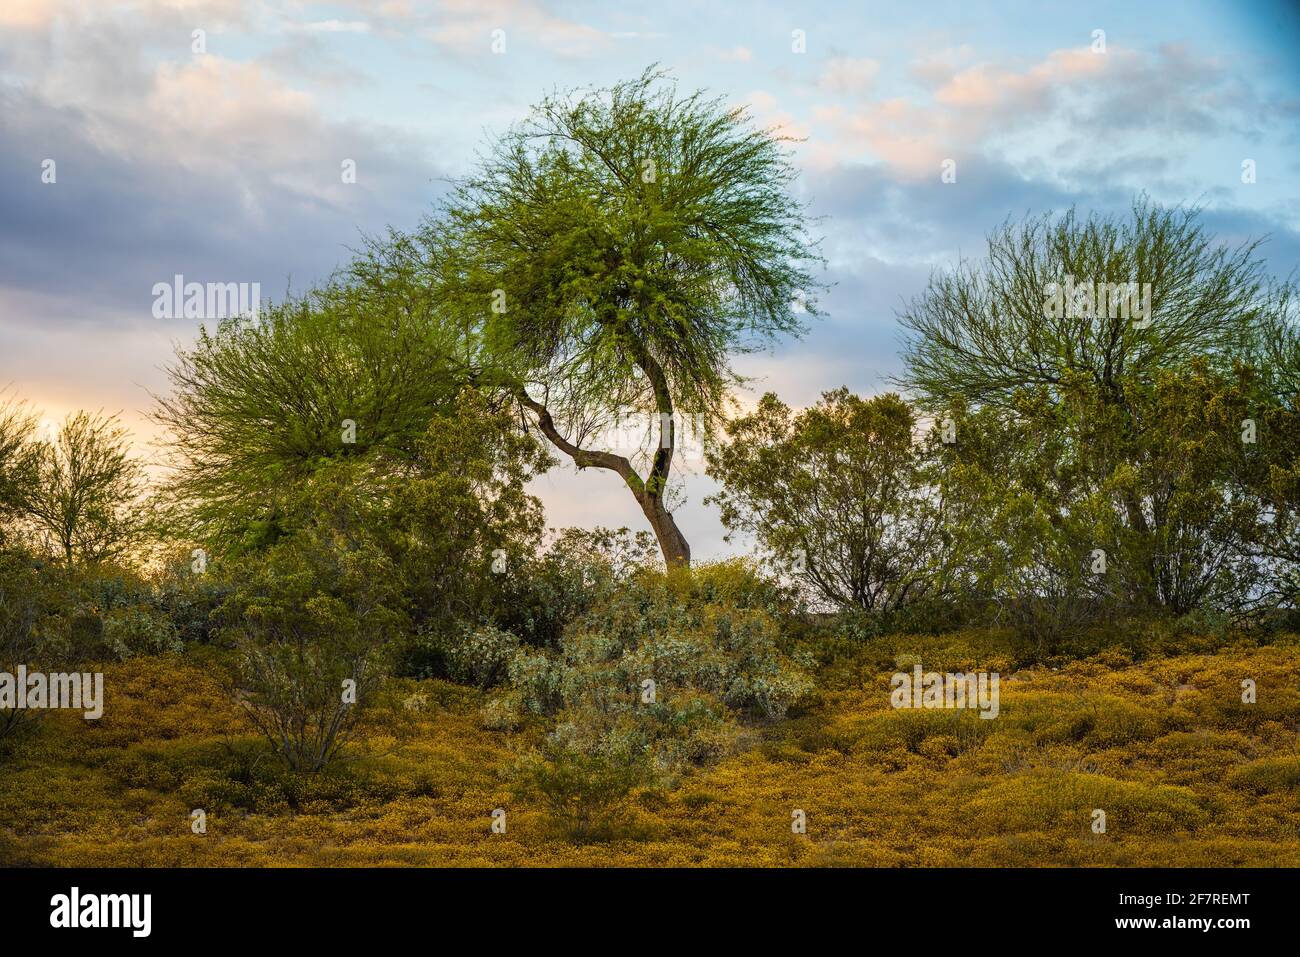 Desert landscape architecture in one of the golf courses in Glendale, Arizona. Desert scenery with desert plants. Stock Photo